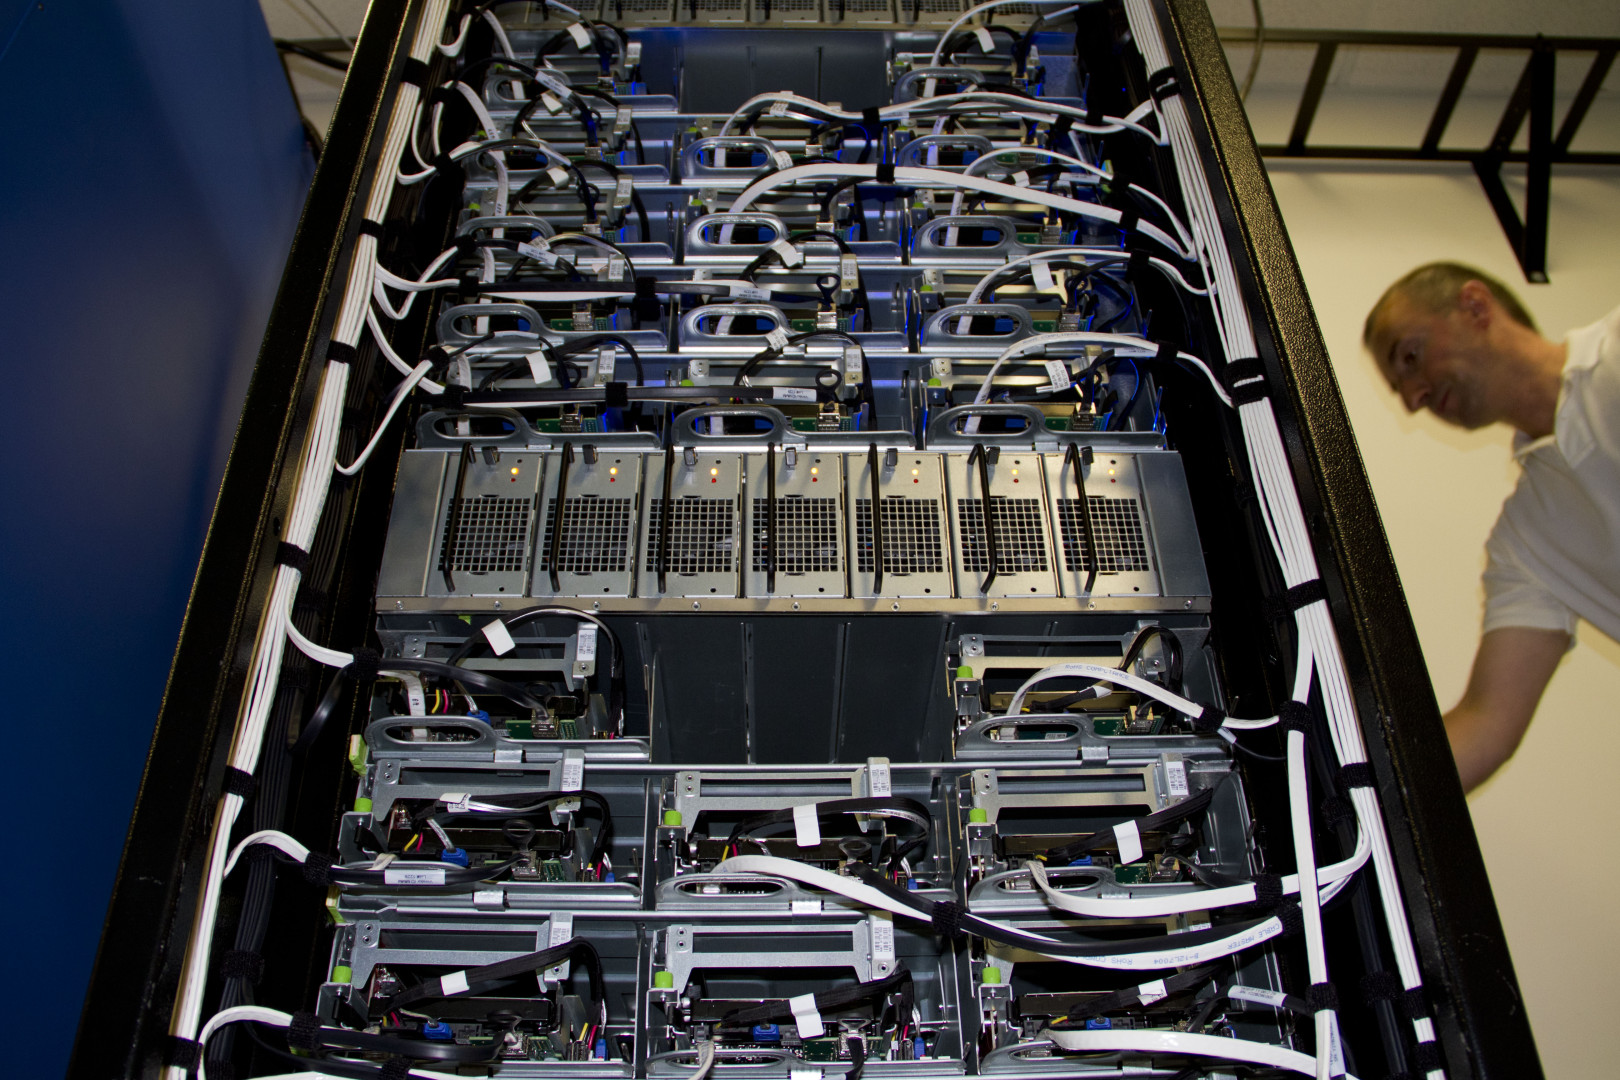 Facebook open rack server: "It’s part of the Open Compute Project’s &a...